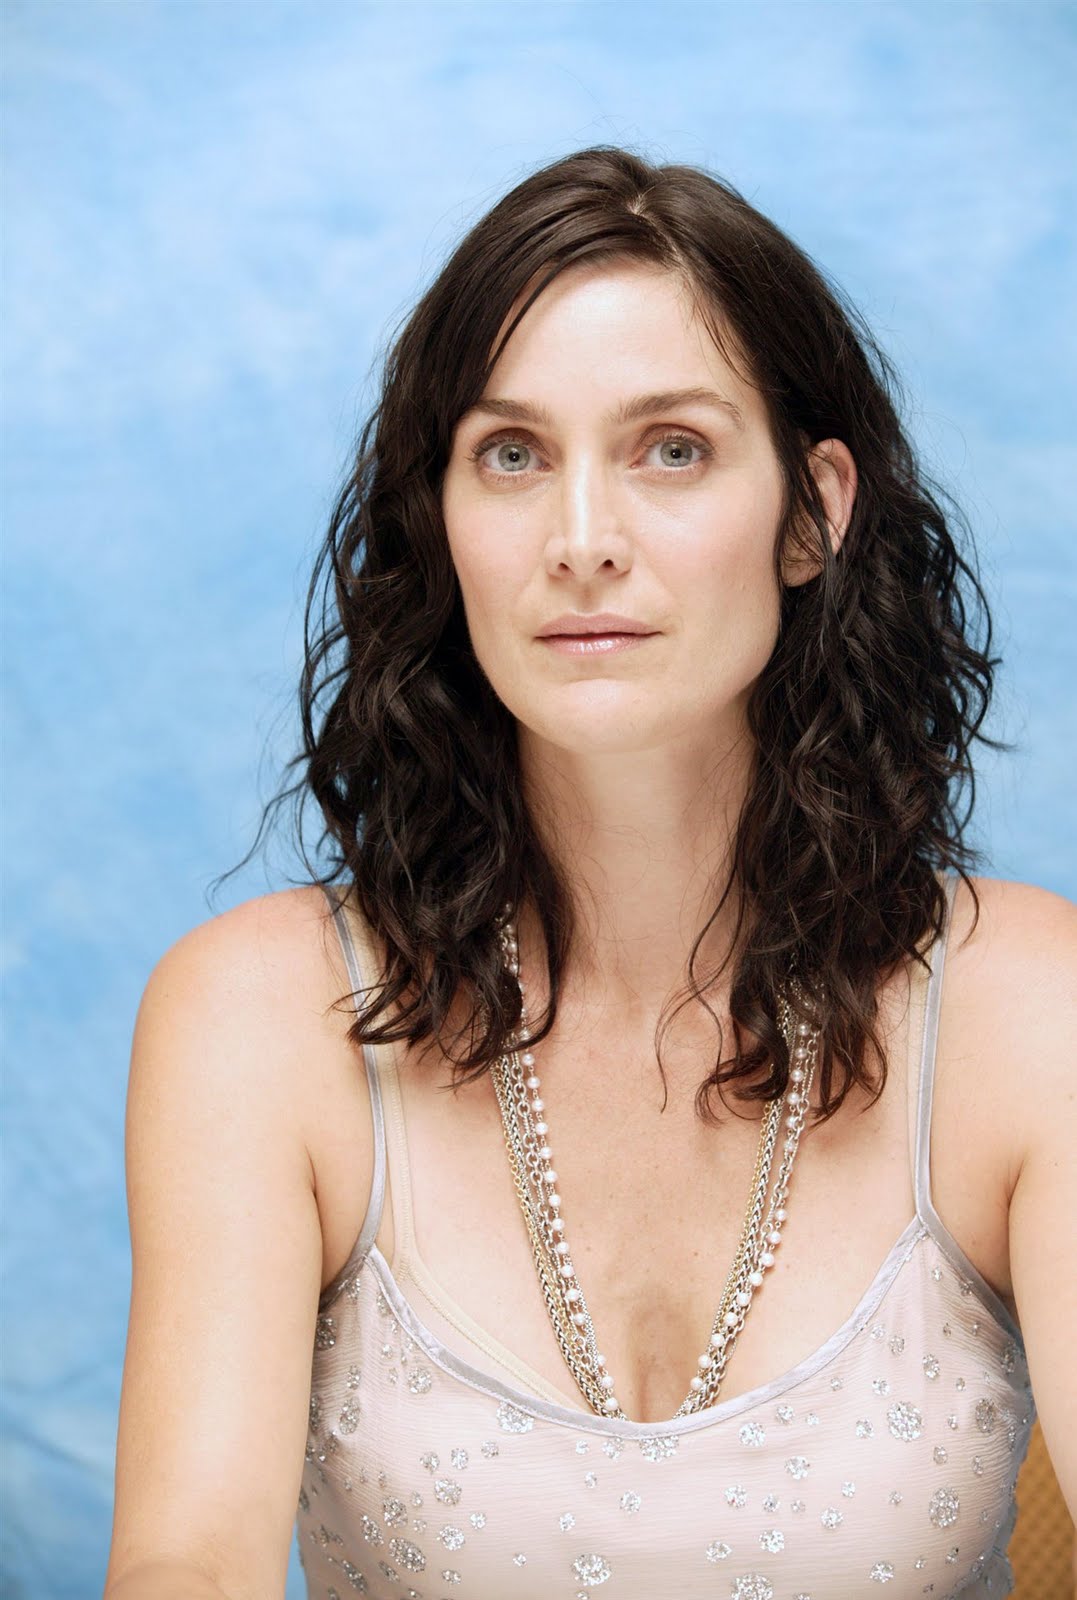 Carrie anne moss hot pics